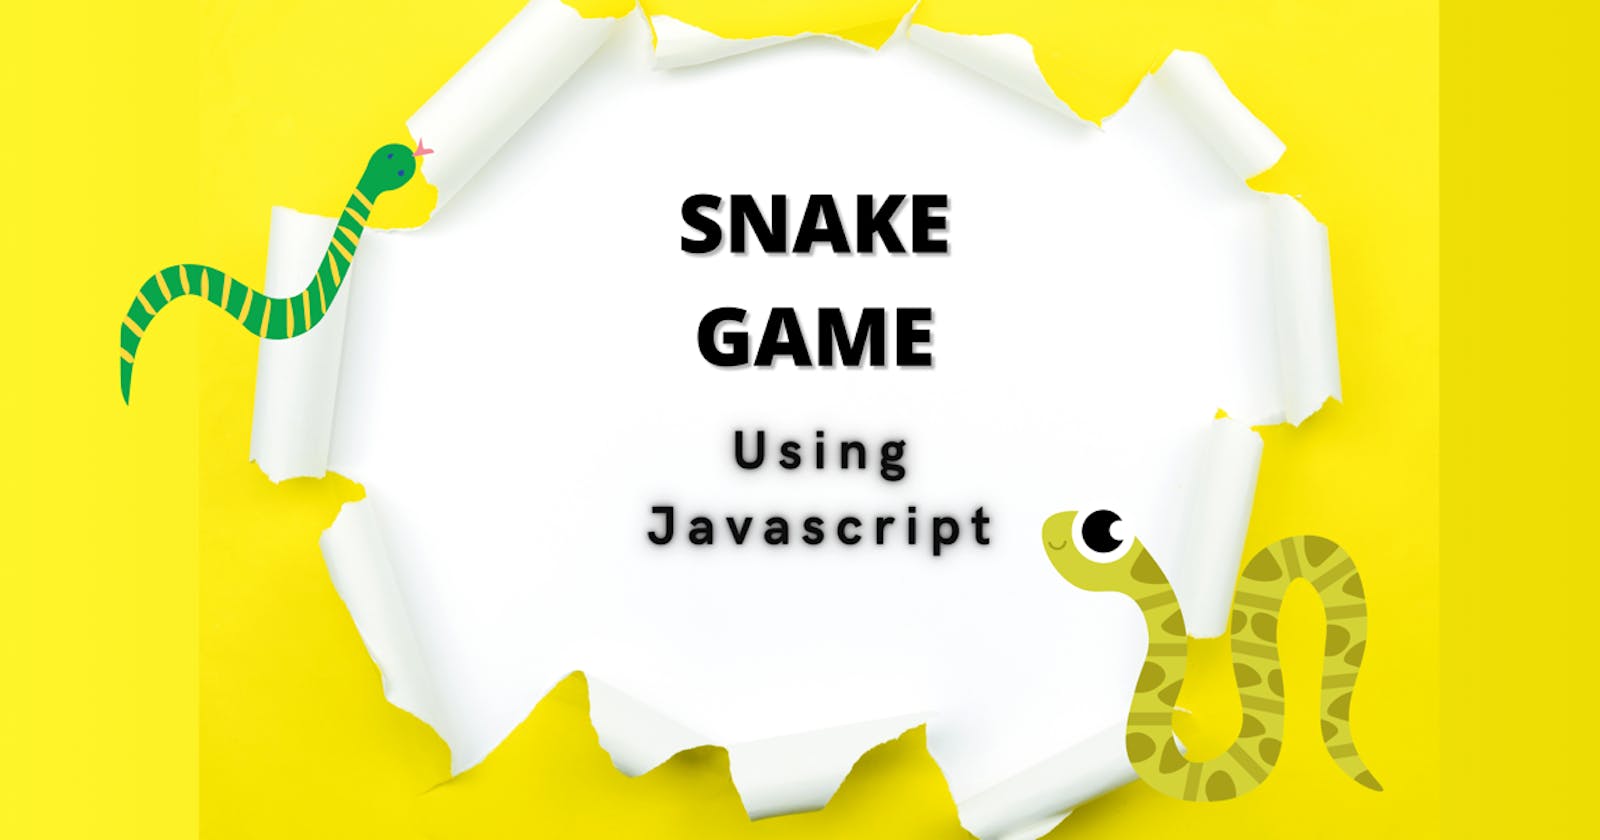 Create your own 🐍 Snake Game with Javascript!